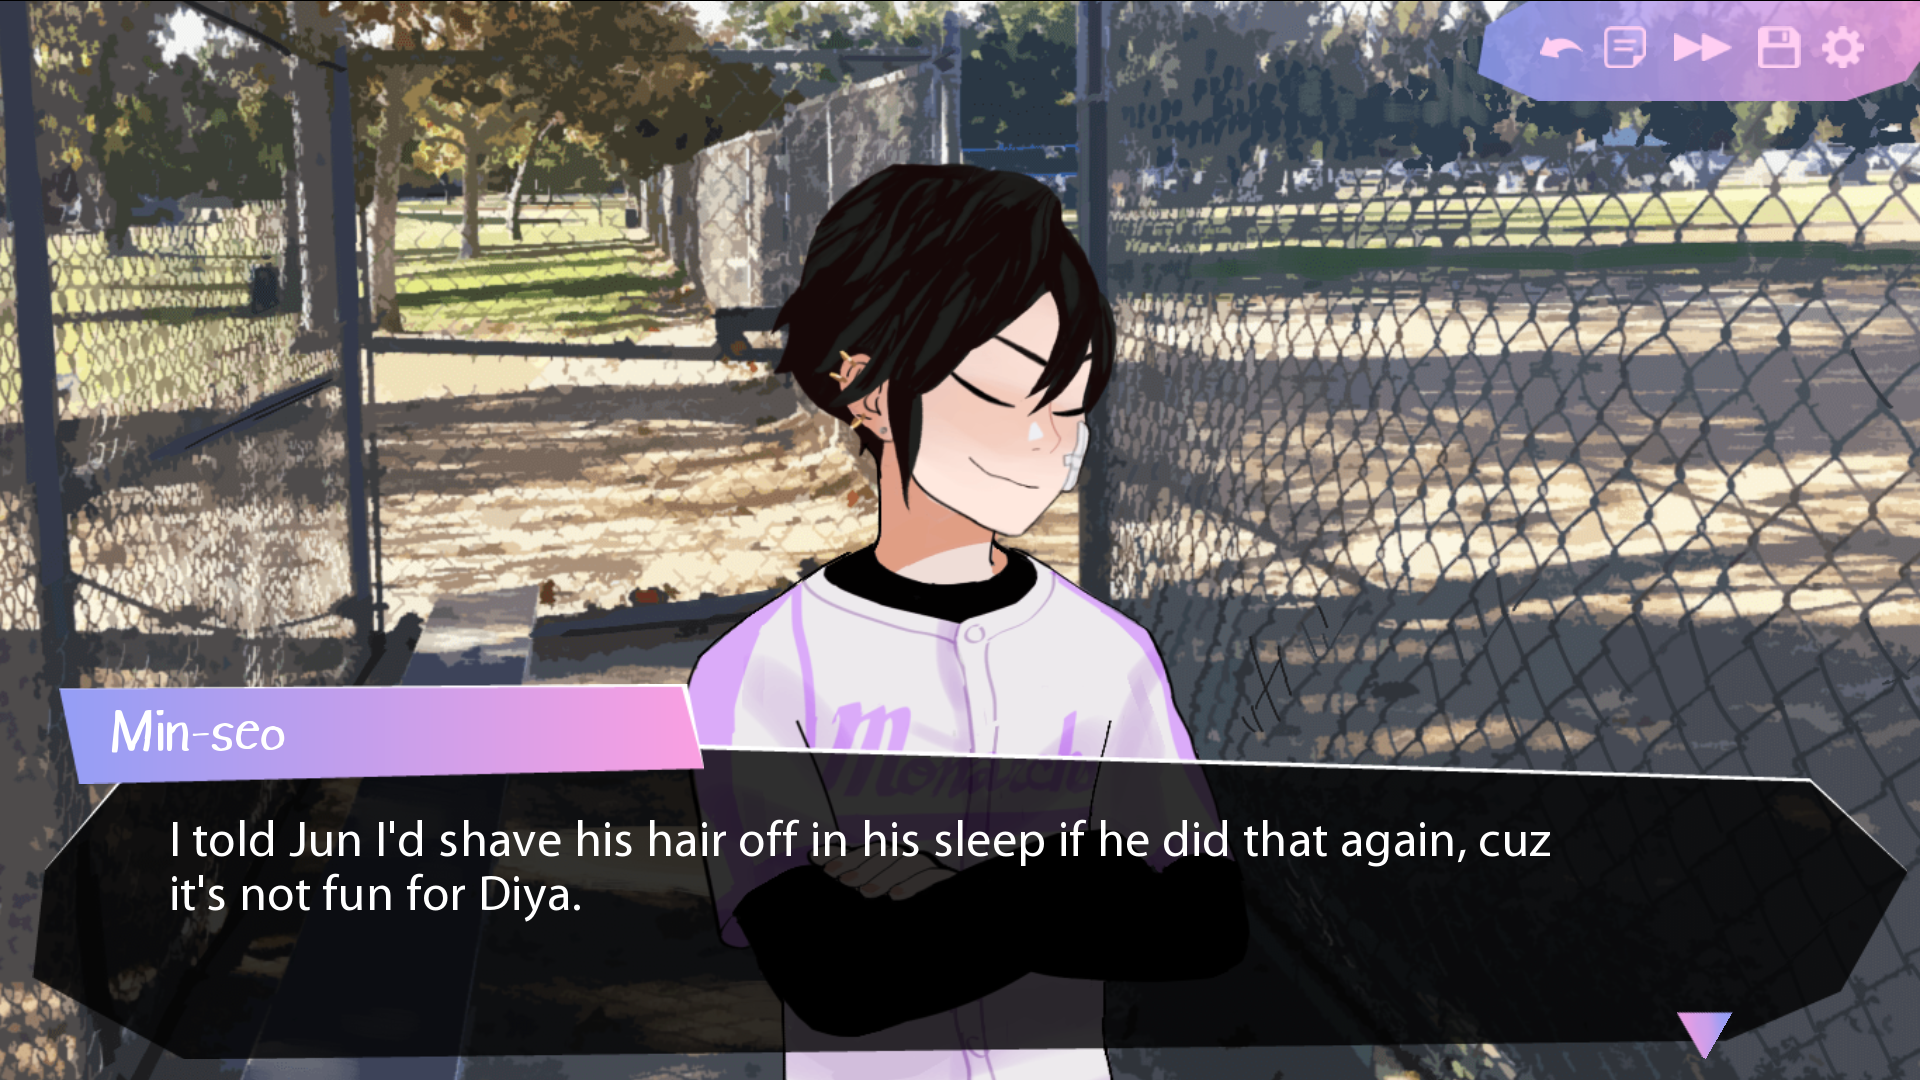 Butterfly Soup 2 screenshot of Min-seo saying "I told Jun I'd shave his hair off in his sleep if he did that again, cuz it's not fun for Diya."